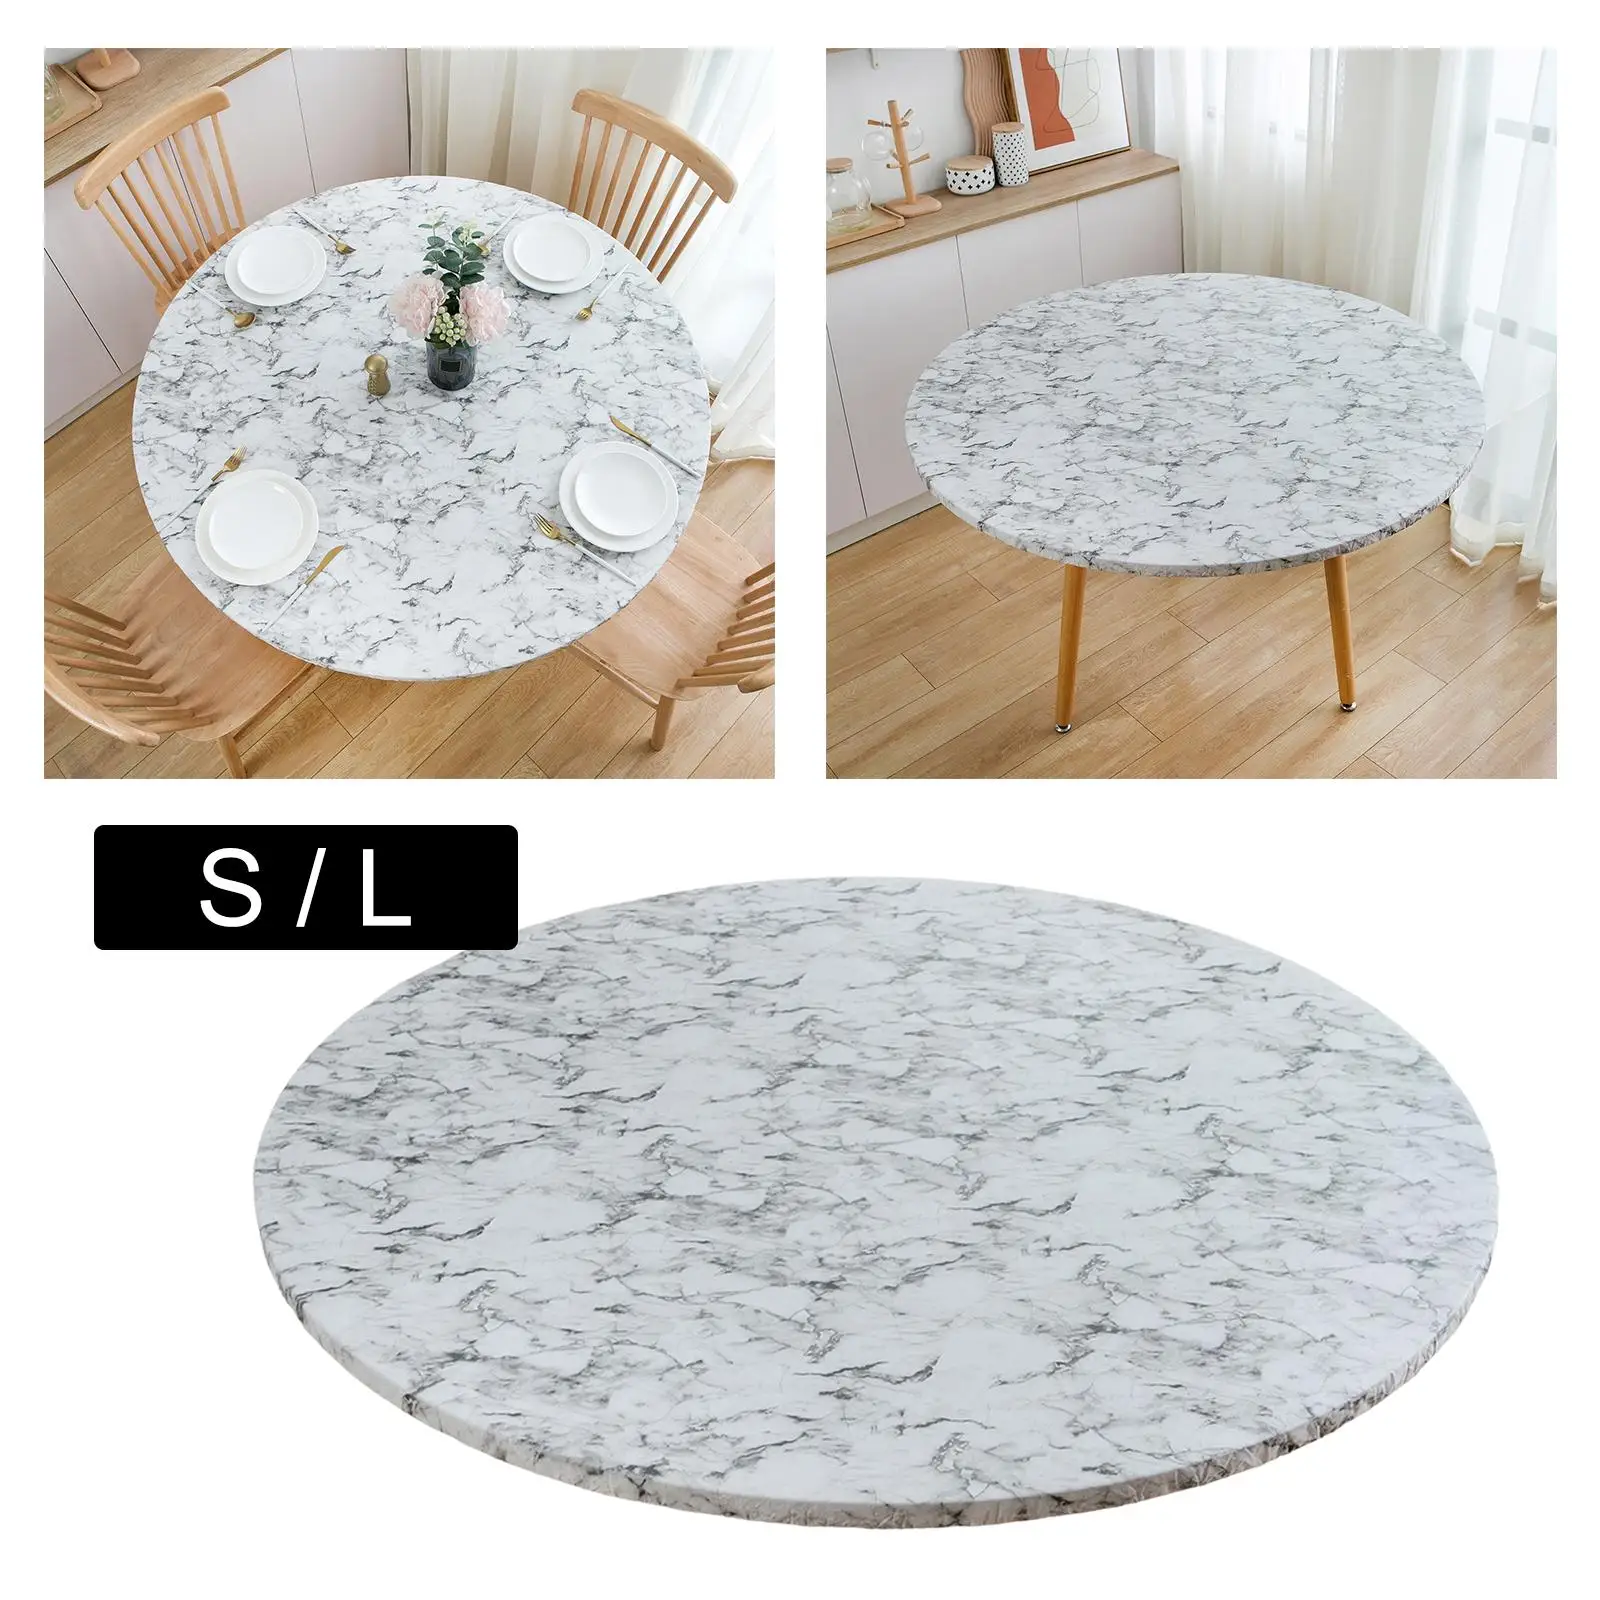 Round Vinyl Fitted Tablecloth PVC Table Cover Table Cloth Wipeable with Flannel Backing Oil Proof for Patio Table Indoor Outdoor